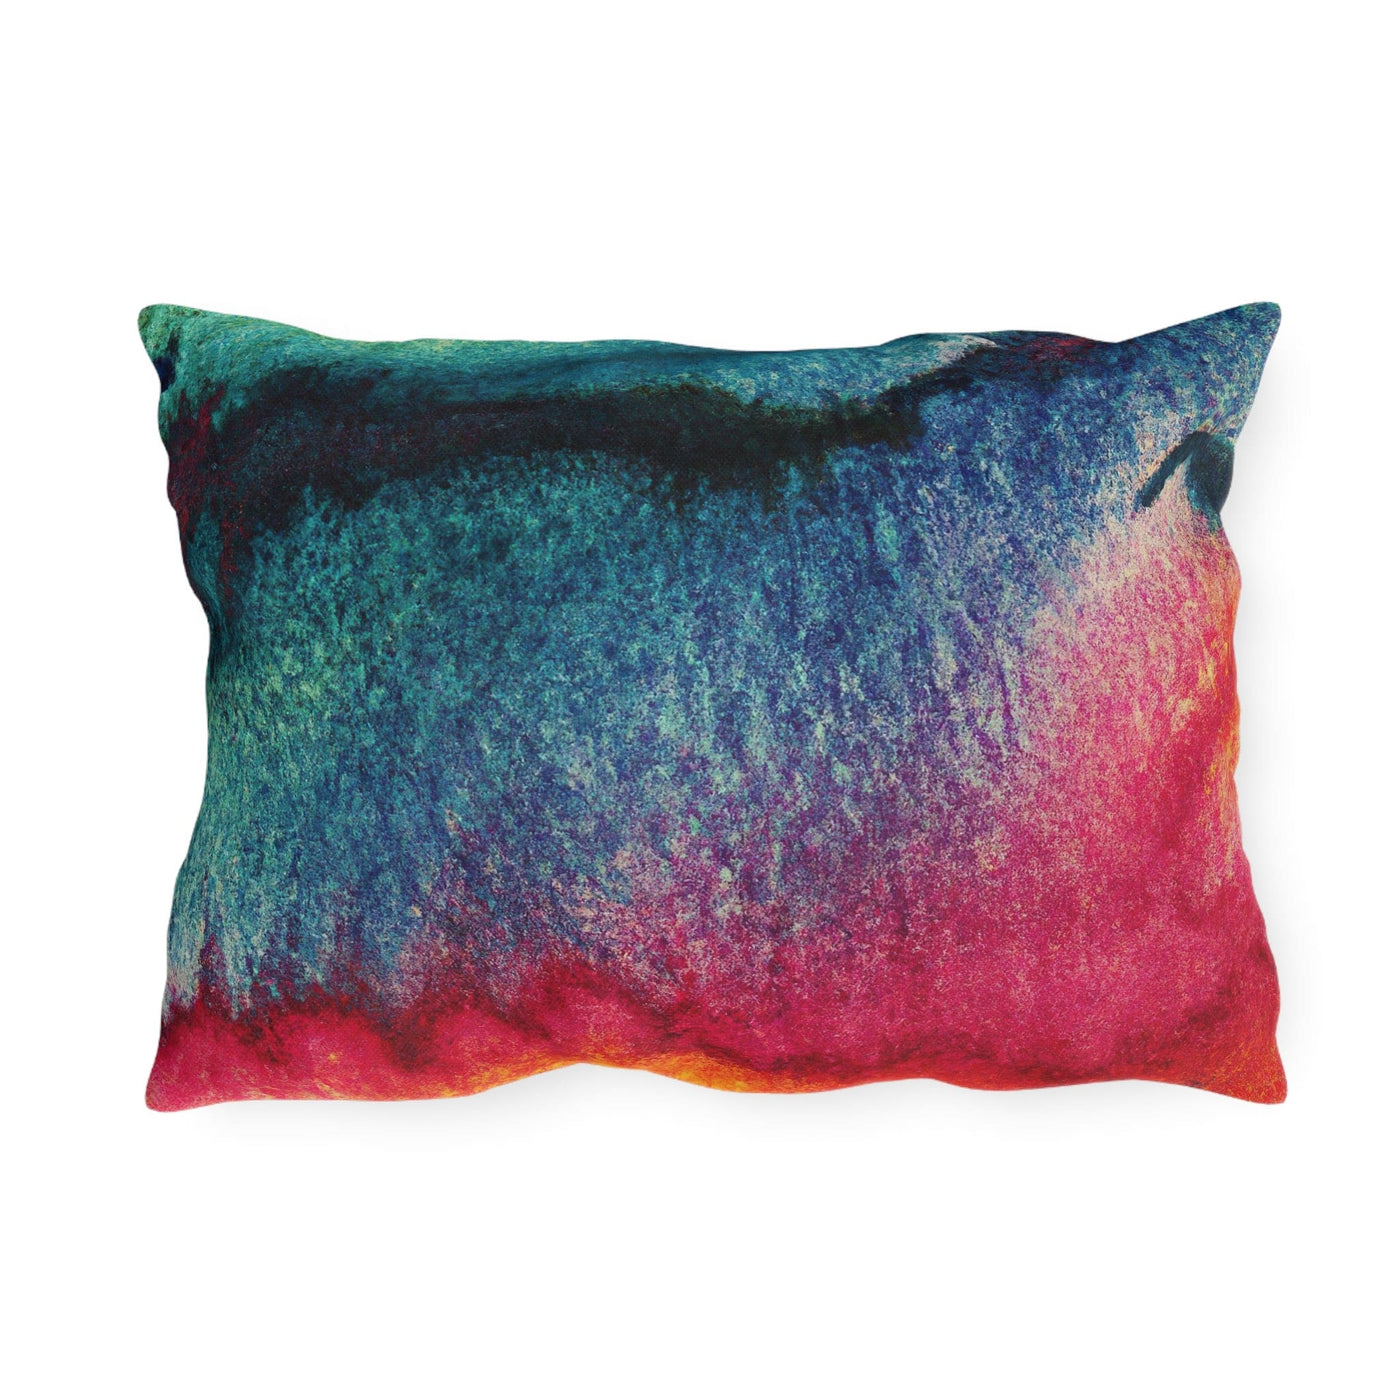 Decorative Outdoor Pillows With Zipper - Set Of 2 Multicolor Watercolor